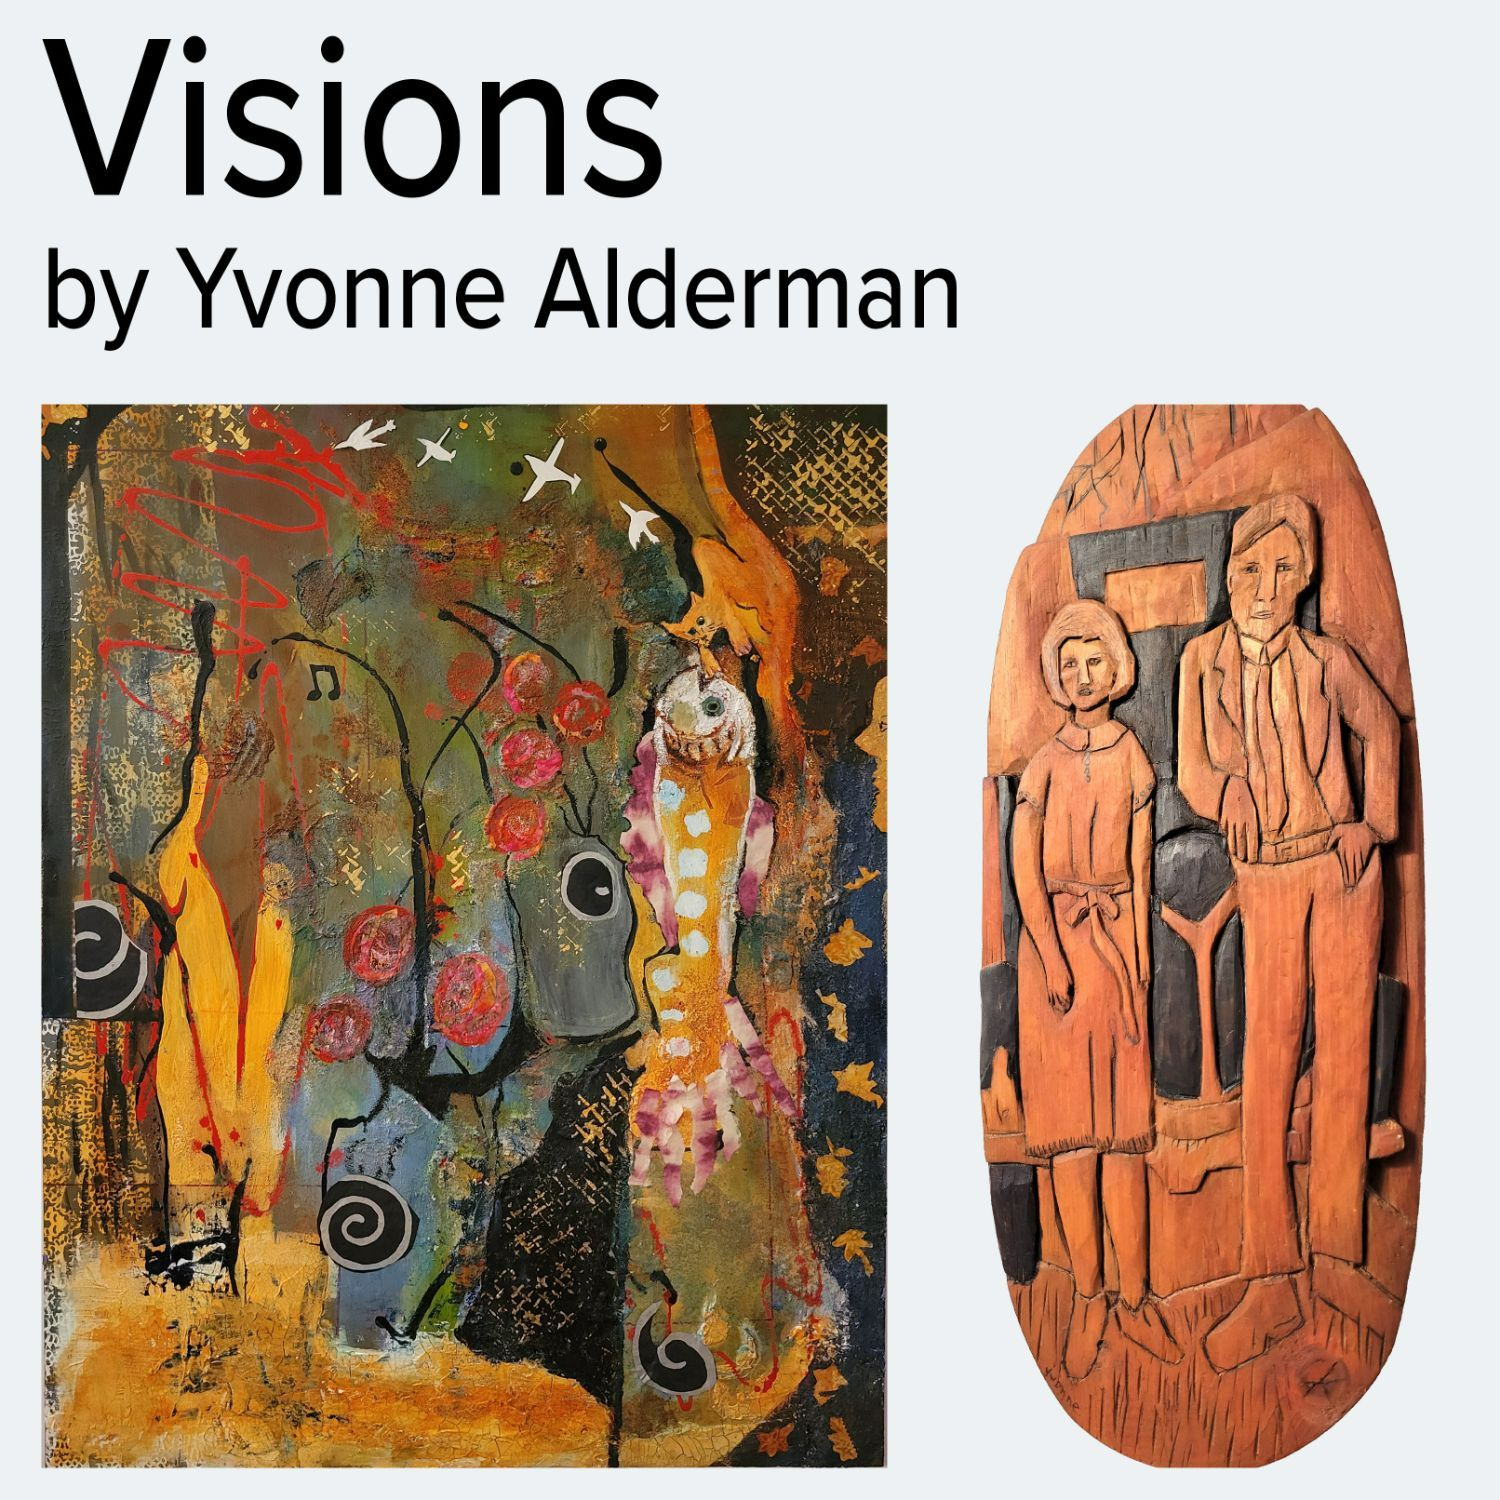 Poster for Visions by Yvonne Alderman; features wood carving and mixed media piece